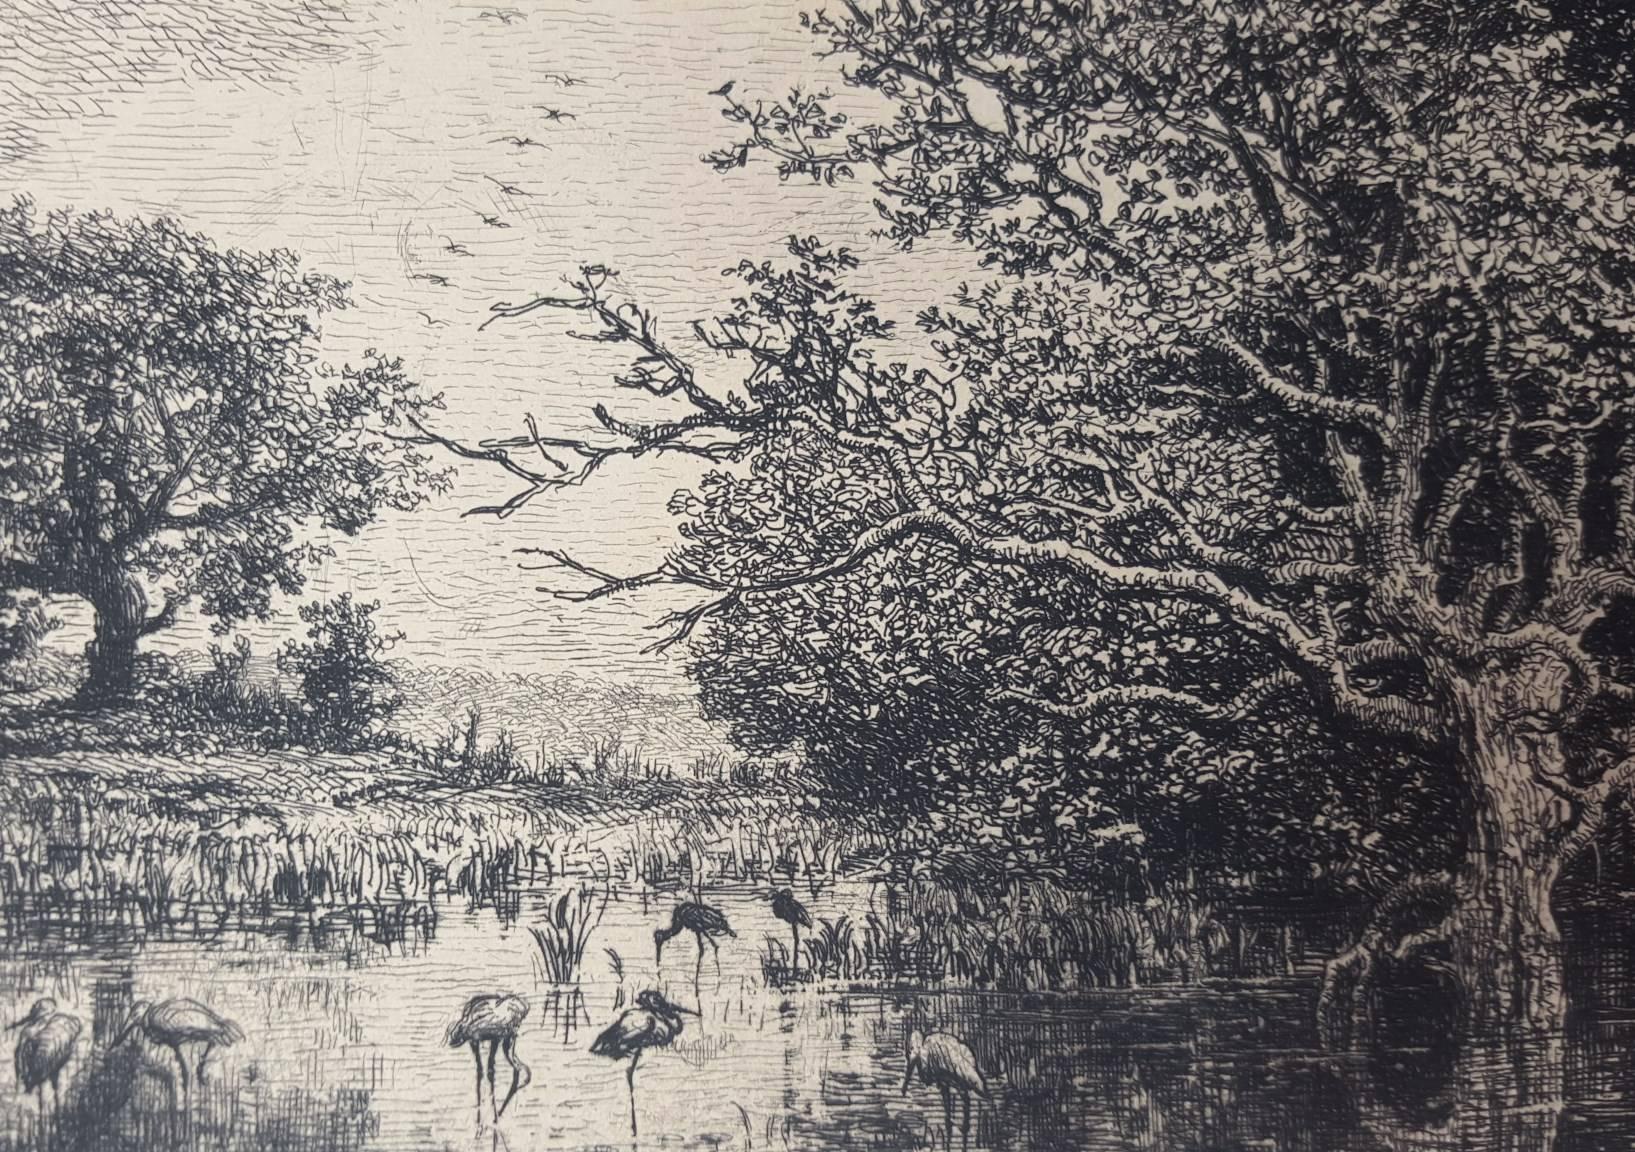 An original etching by French artist Charles Francois Daubigny (1817-1878) titled 